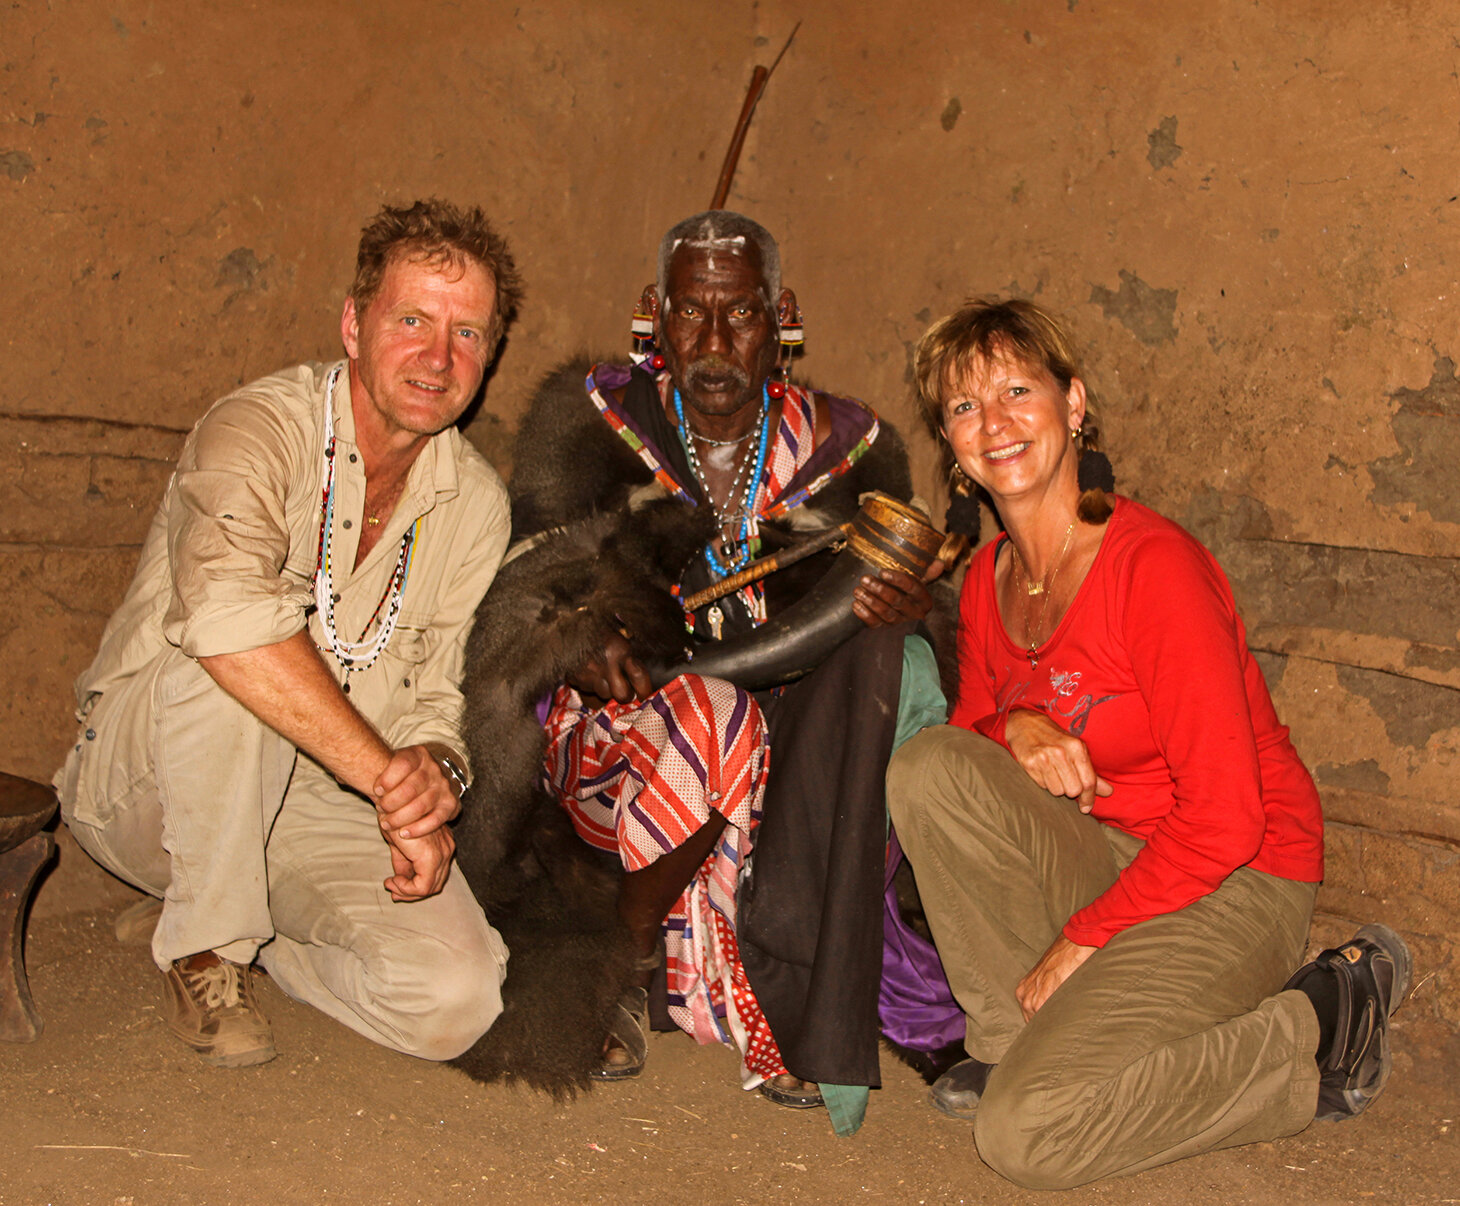 We meet and are blessed by the spiritual leader of the Maasai, Laibon.